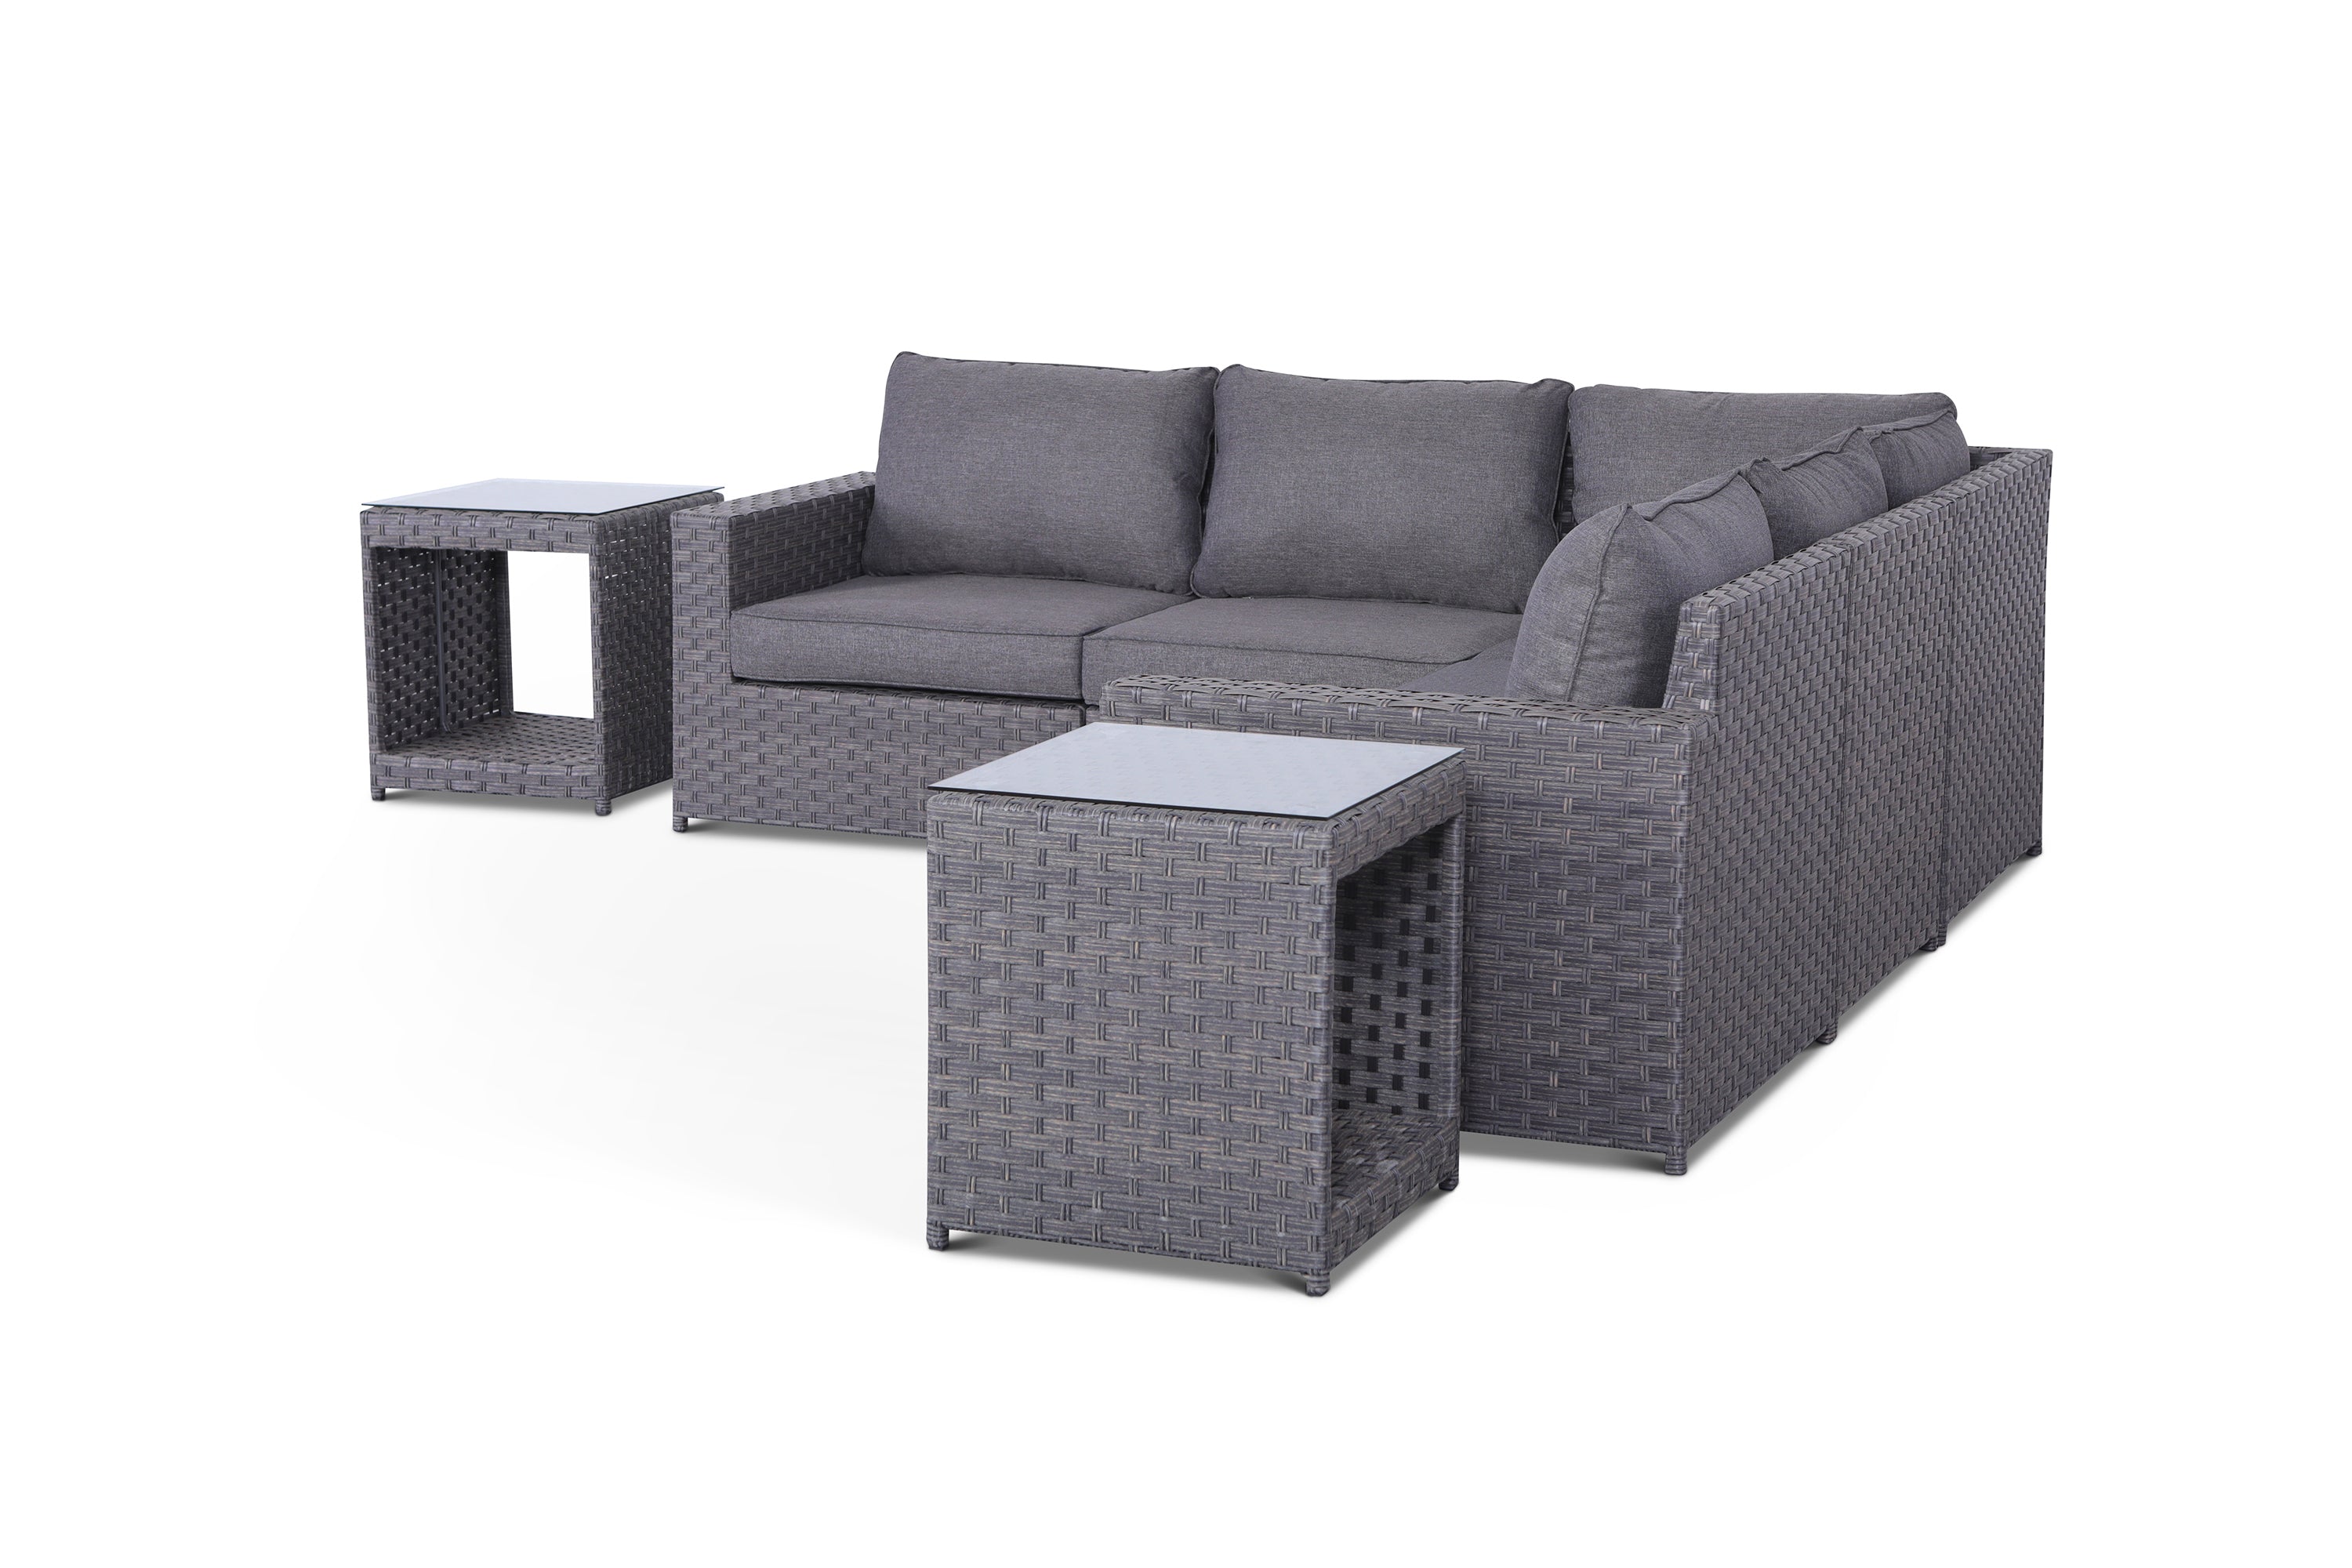 Cromwell 7 Piece Outdoor Sectional Set with End Tables